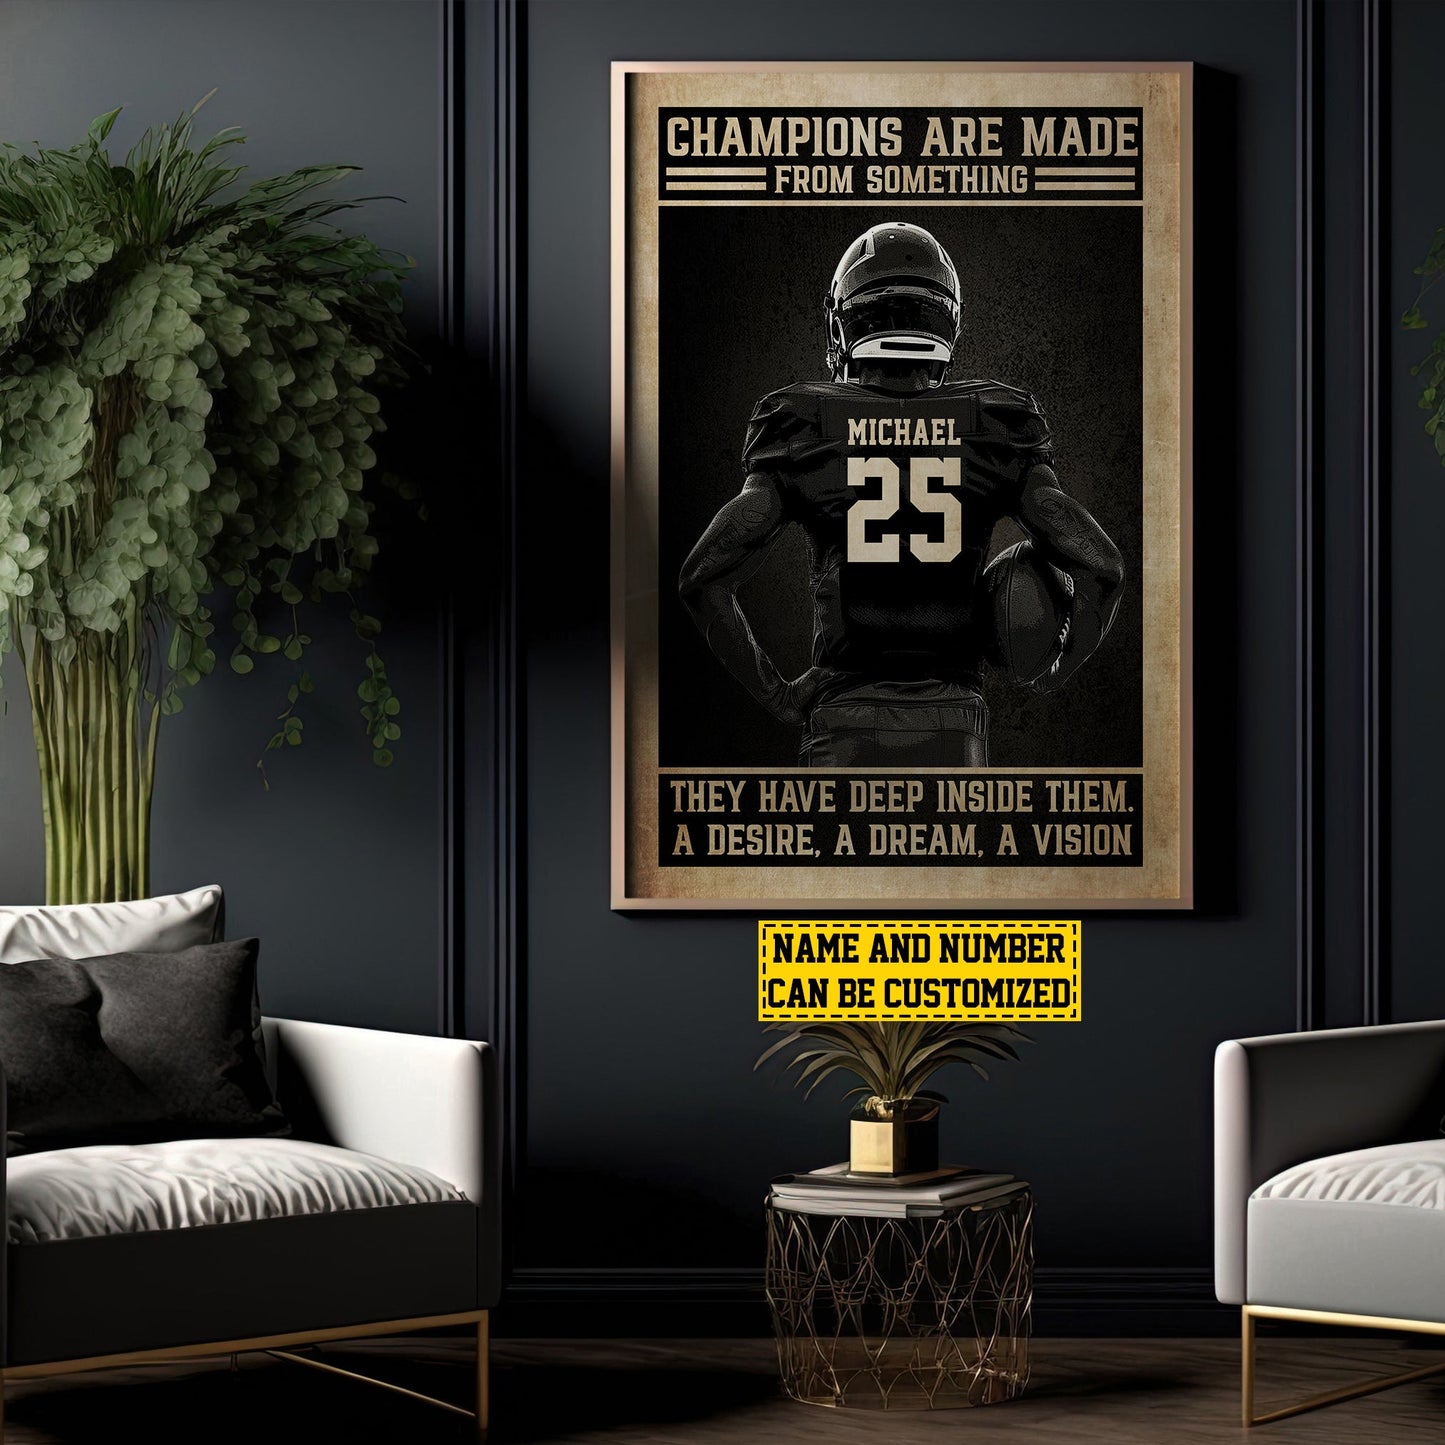 Personalized Football Canvas Painting, Champions Are Made From Something, Inspirational Quotes Wall Art Decor, Poster Gift For Football Lovers